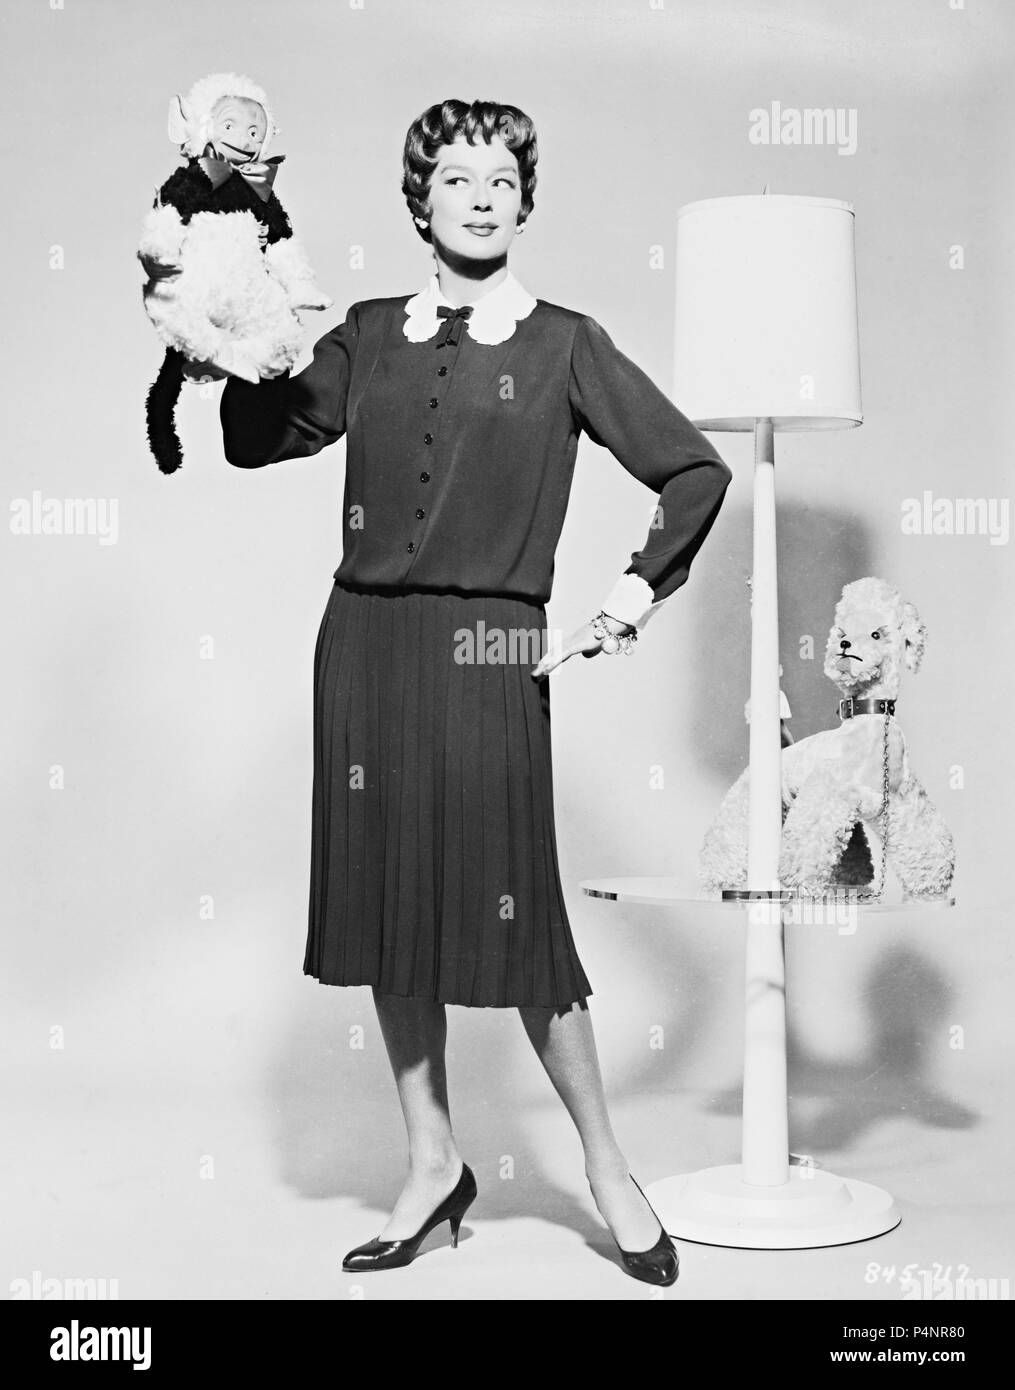 Original Film Title: AUNTIE MAME.  English Title: AUNTIE MAME.  Film Director: MORTON DACOSTA.  Year: 1958.  Stars: ROSALIND RUSSELL. Credit: WARNER BROTHERS / Album Stock Photo